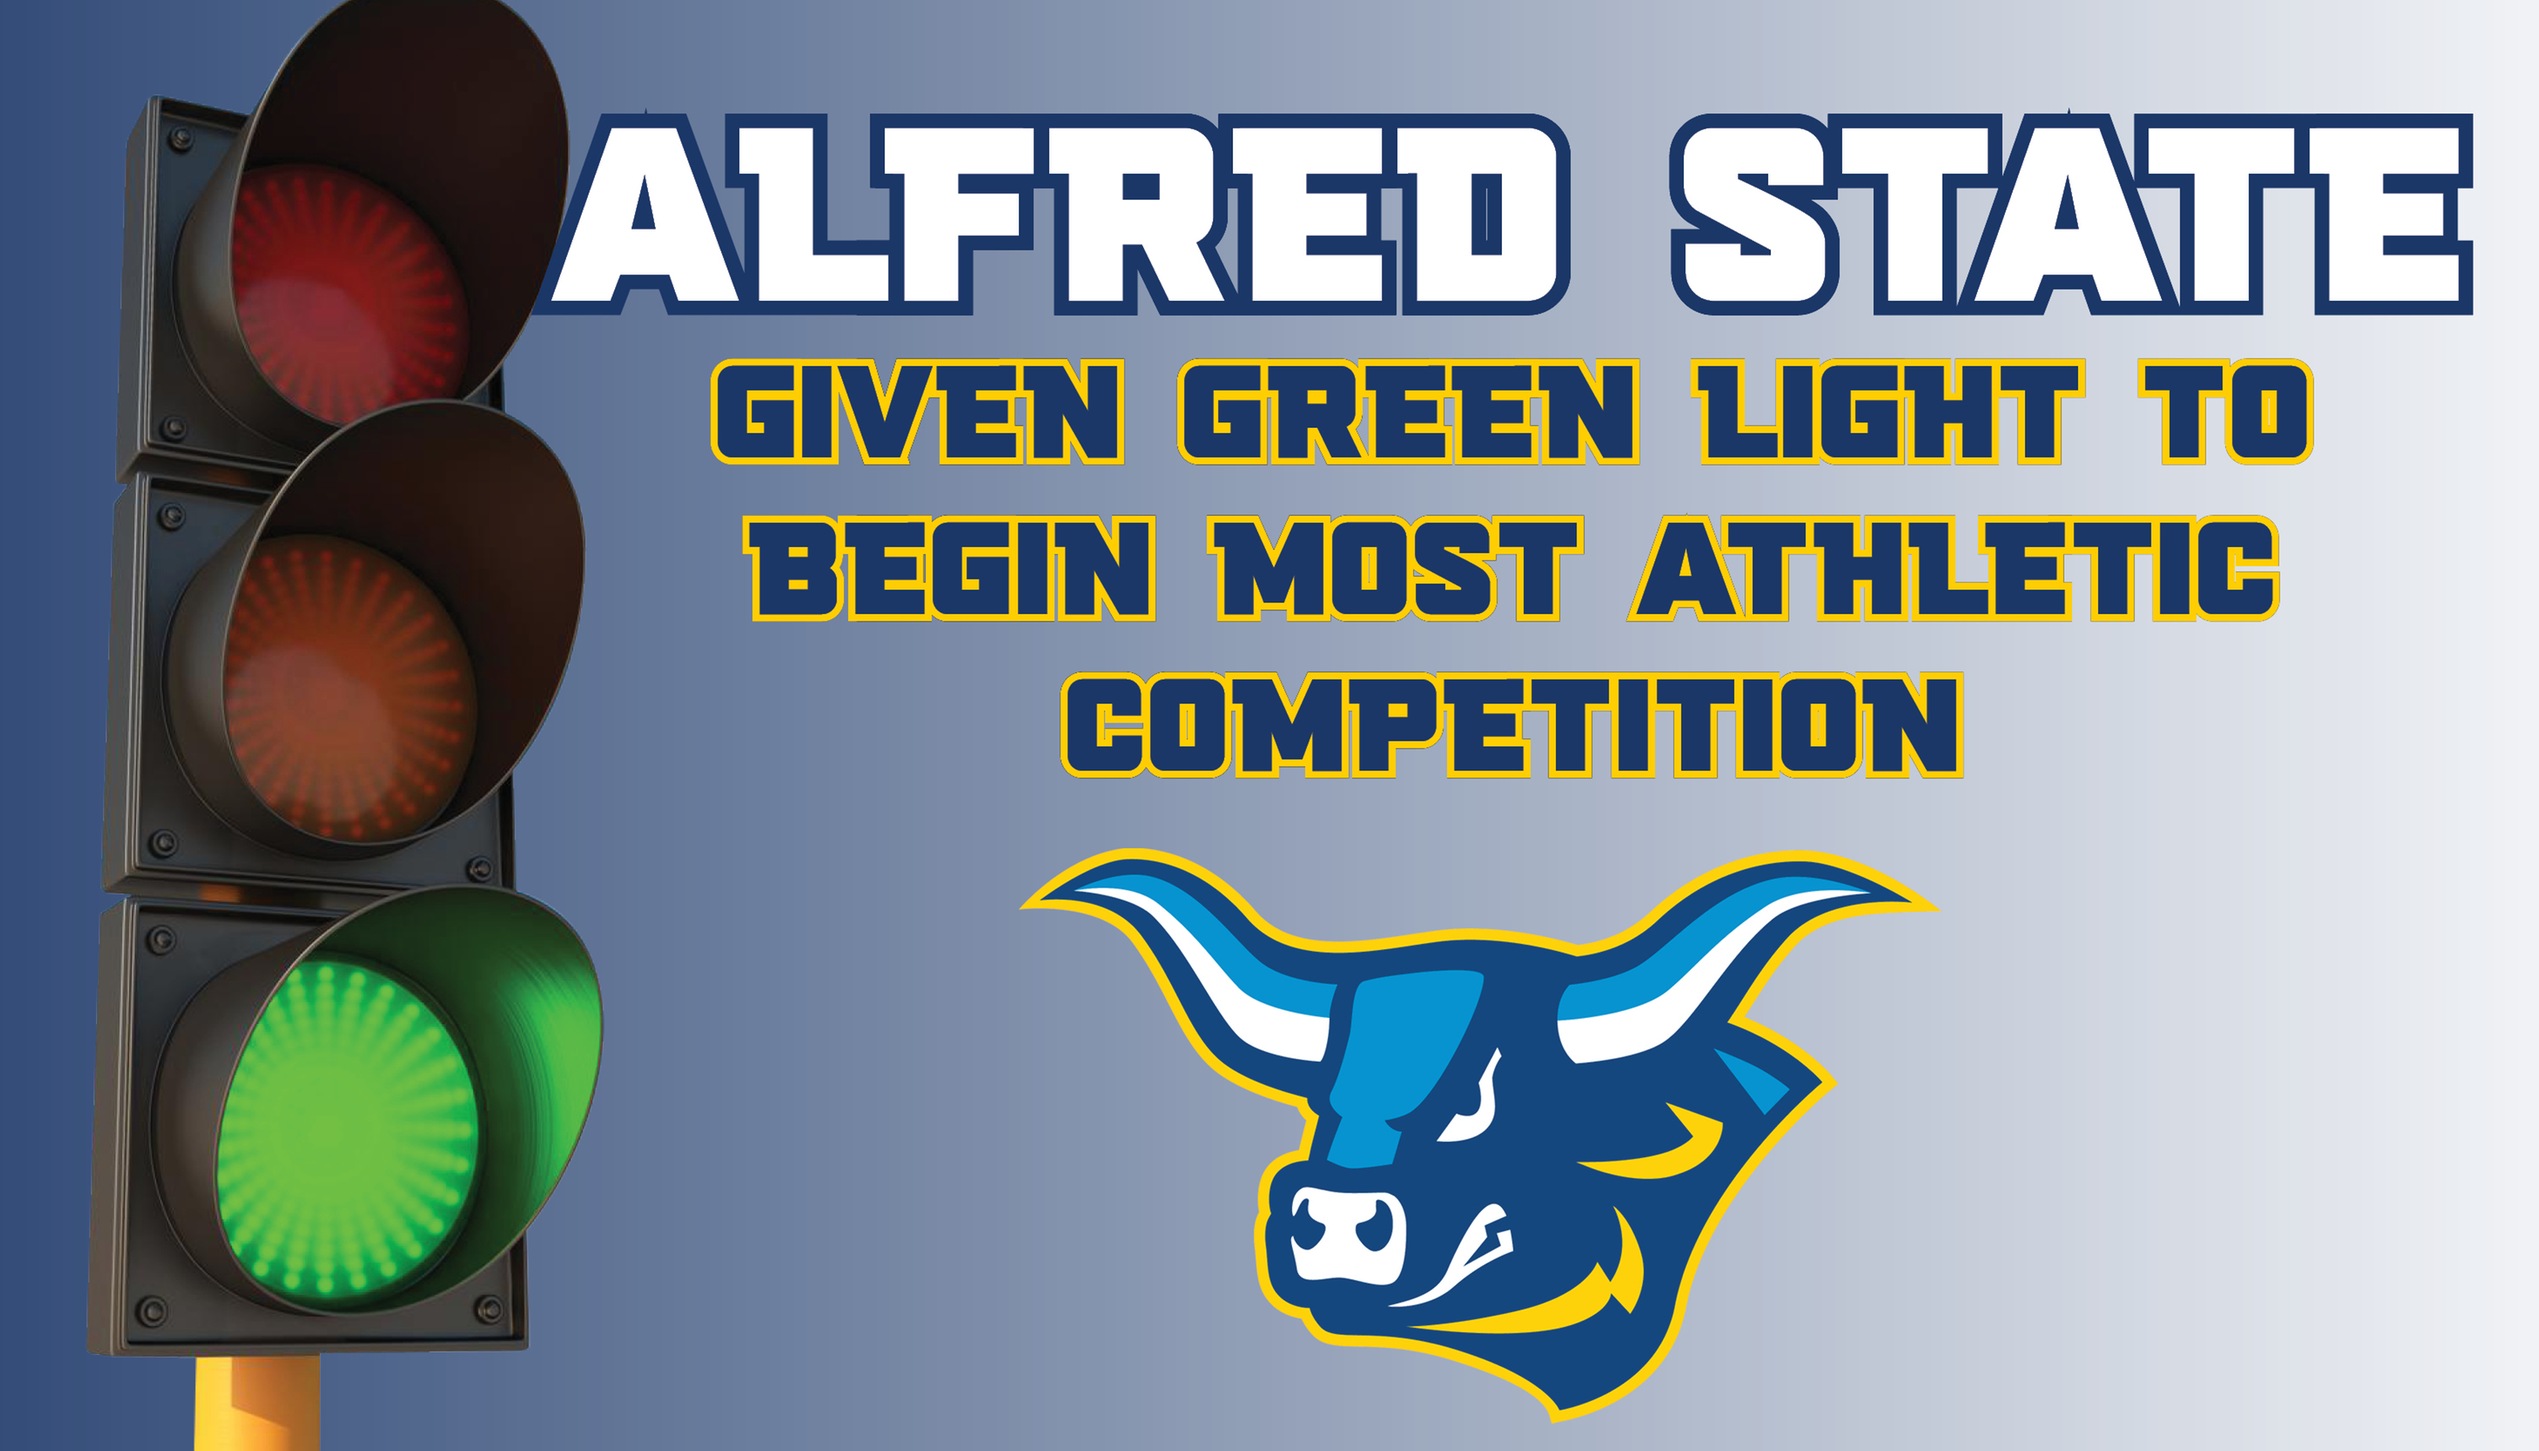 Picture includes stop light and Alfred State athletic Ox logo